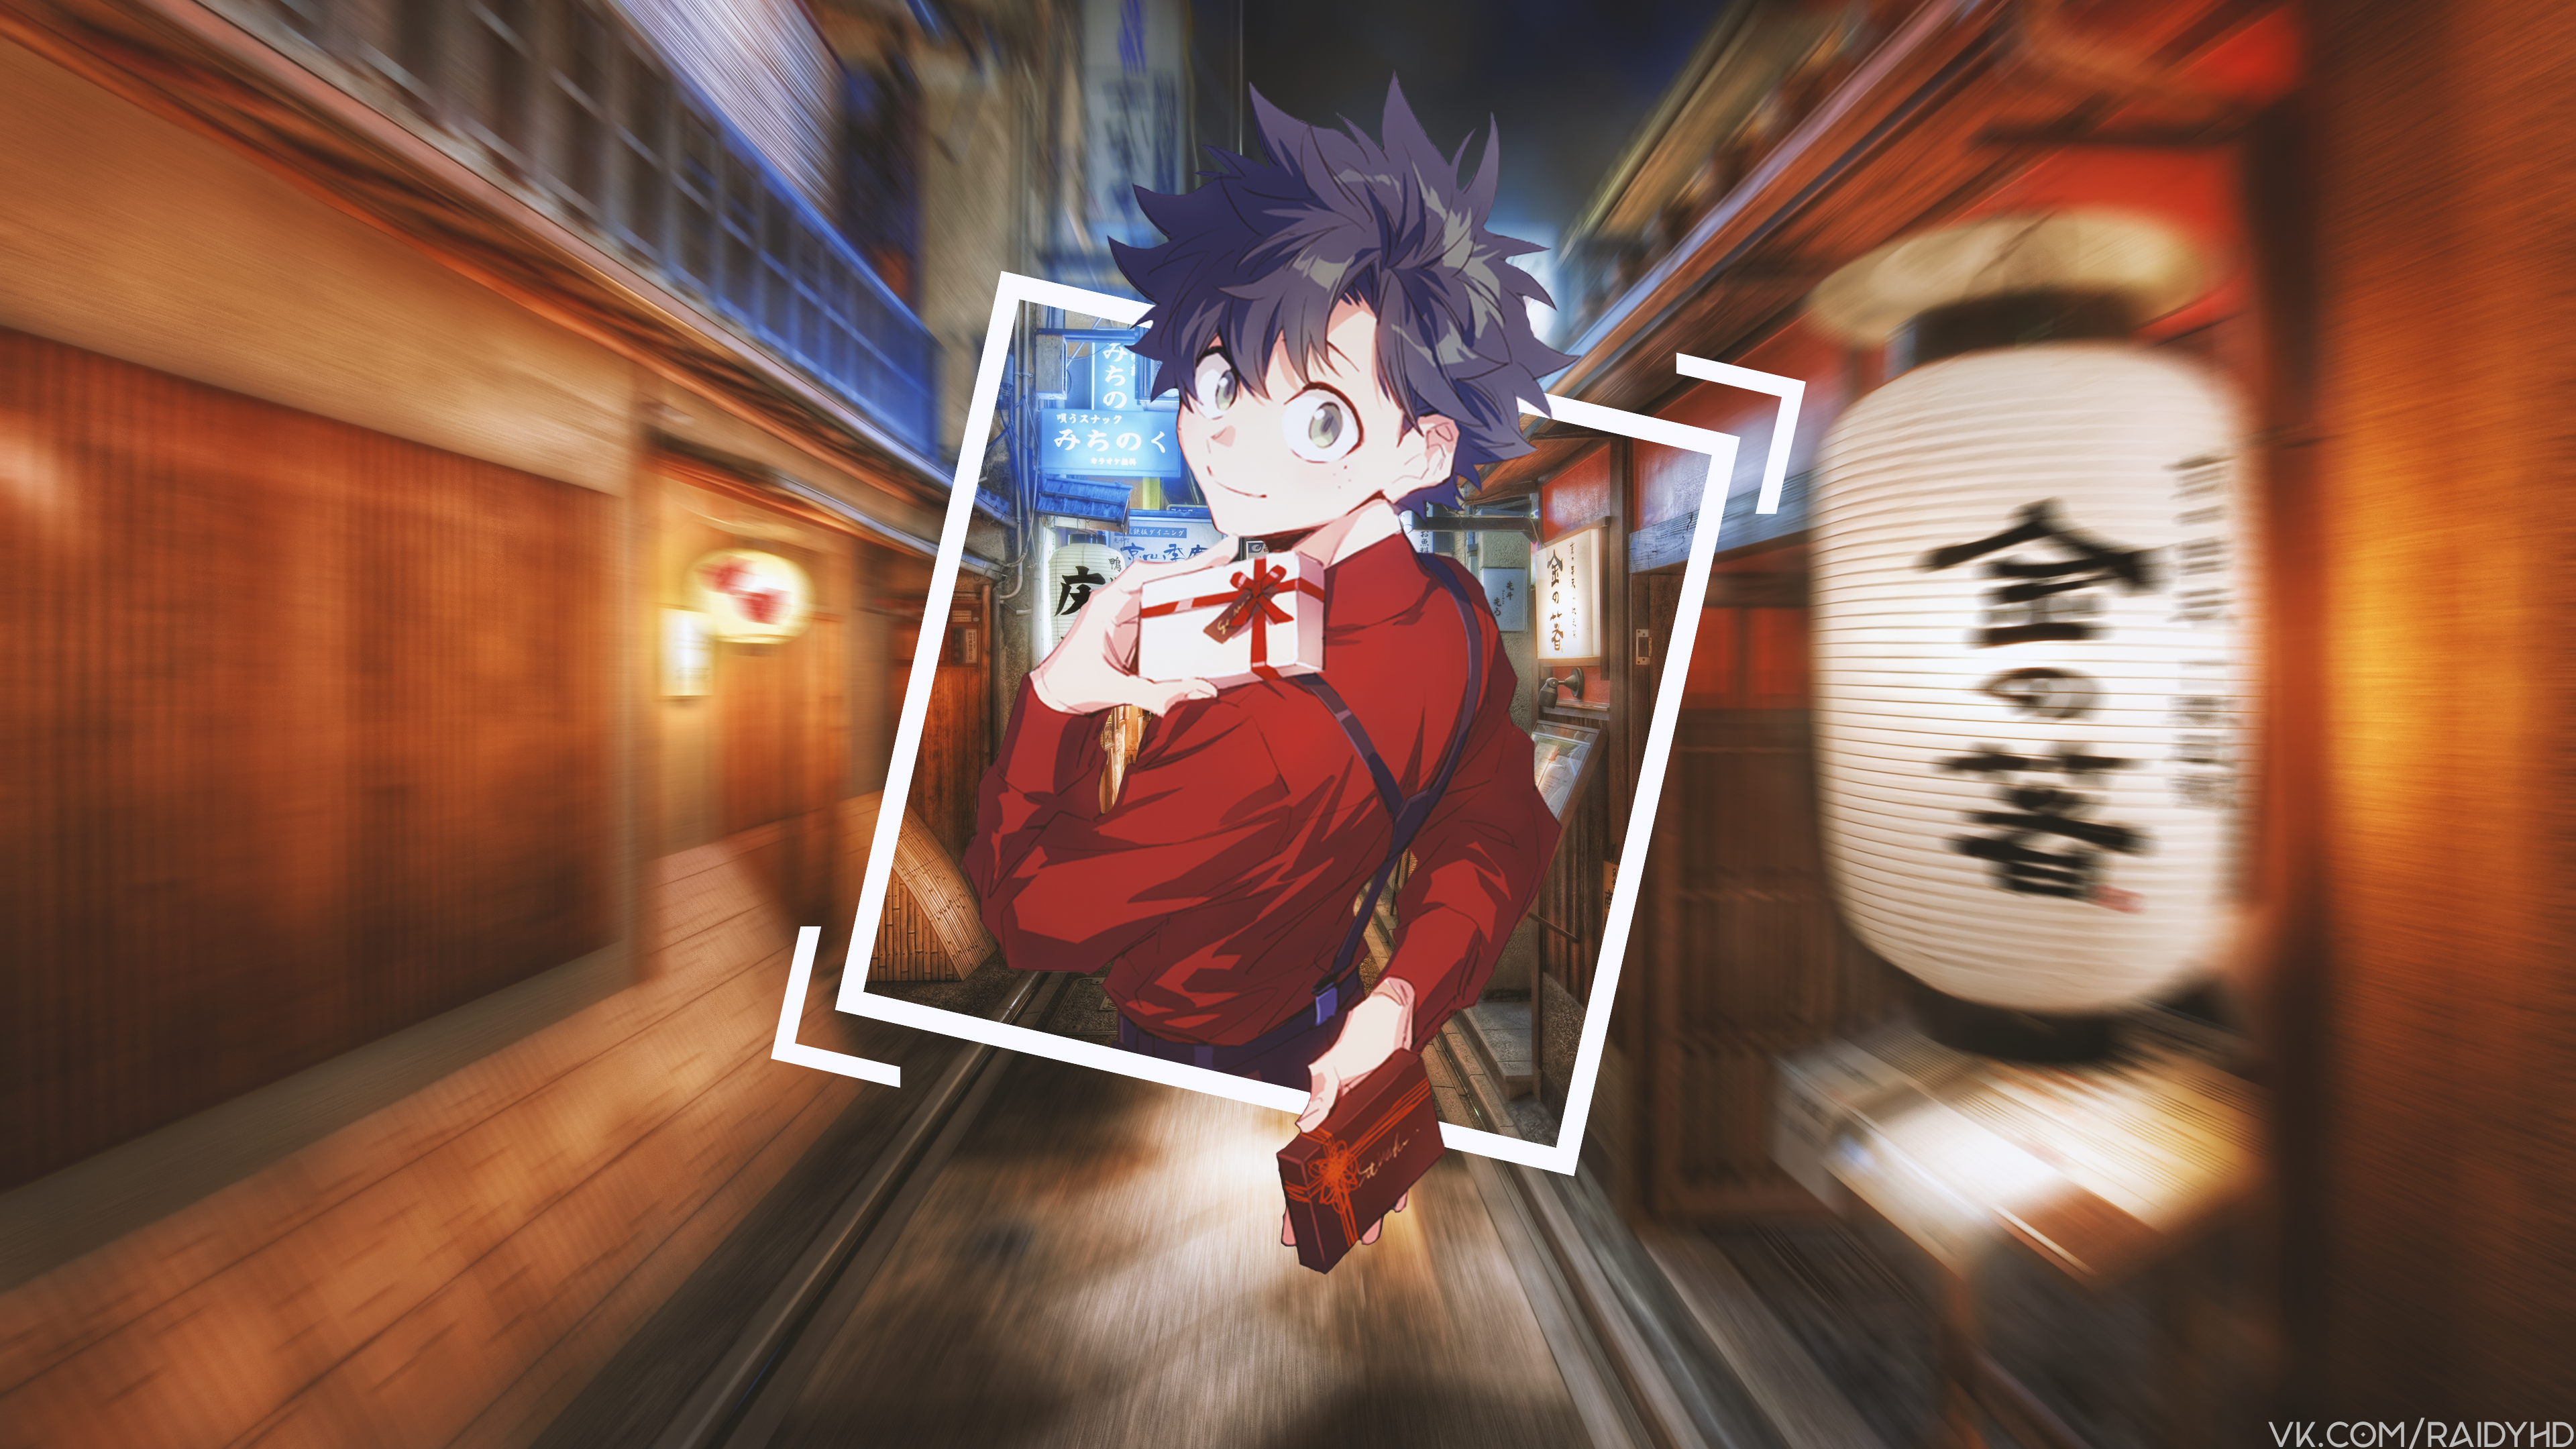 Anime 3840x2160 anime anime boys picture-in-picture Kyoto Japan Asia purple hair looking at viewer